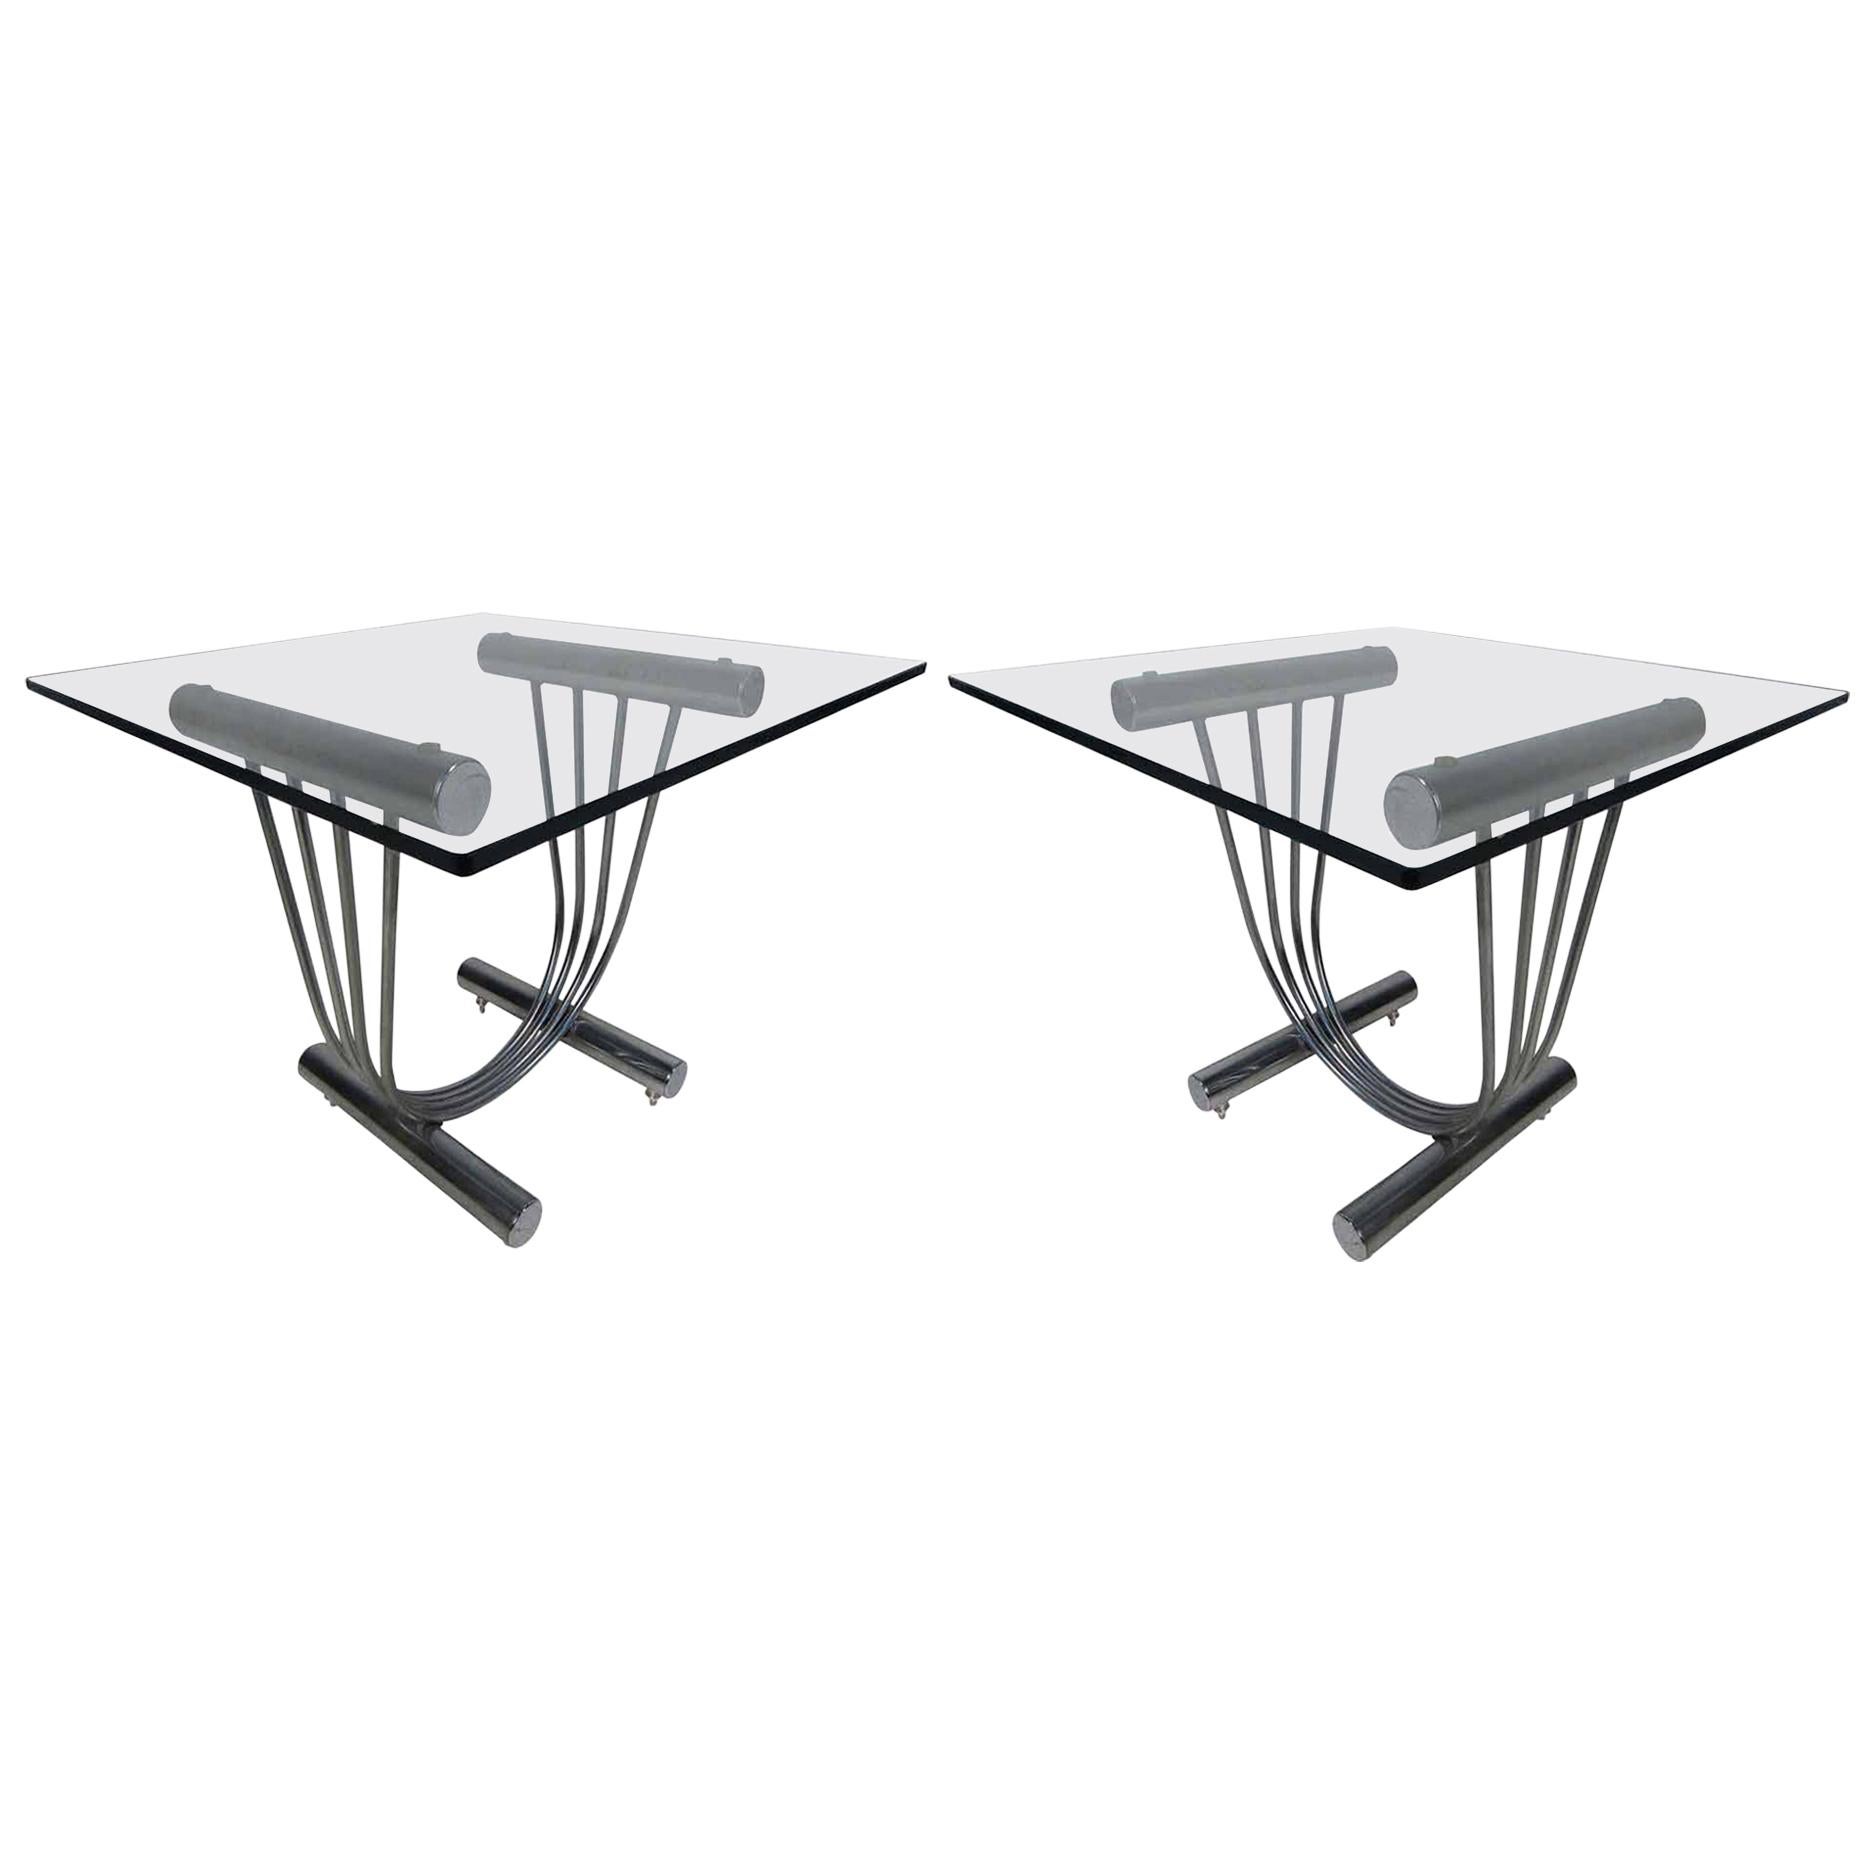 Midcentury DIA Style Chrome and Glass Side Tables